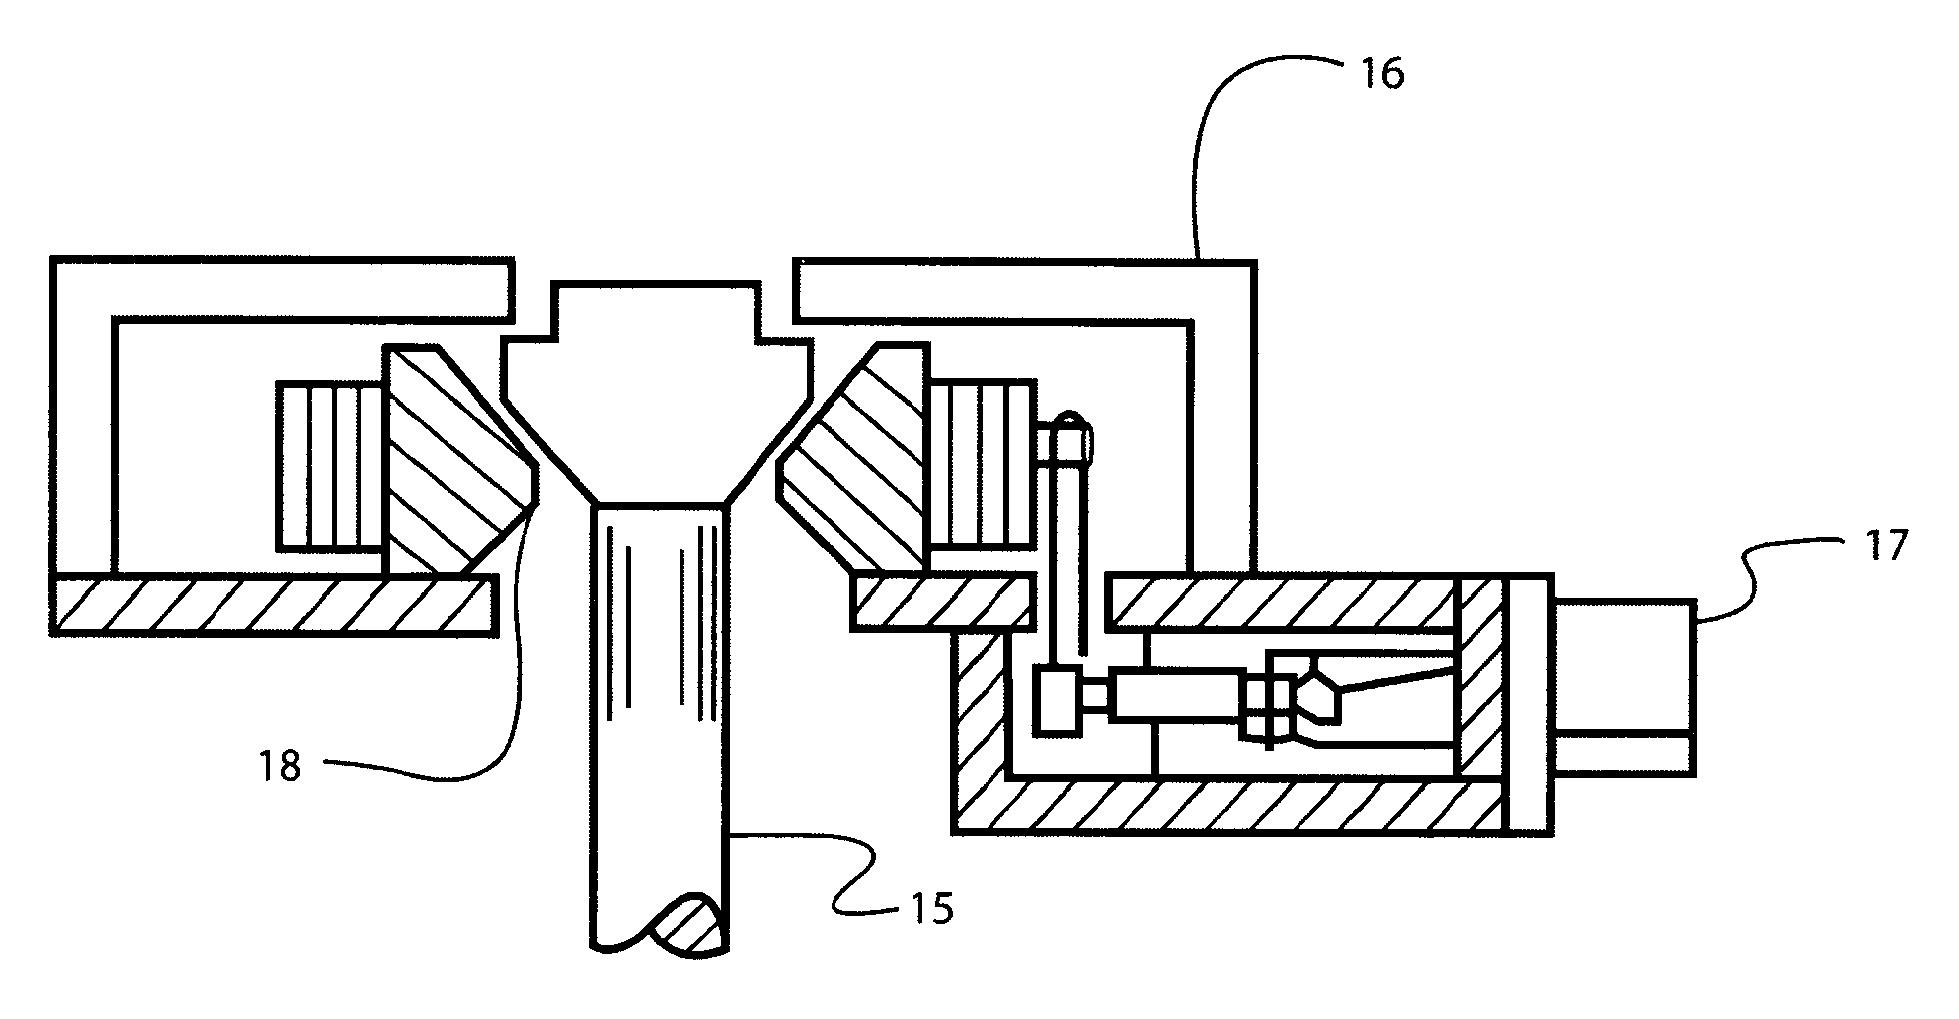 Radial release device